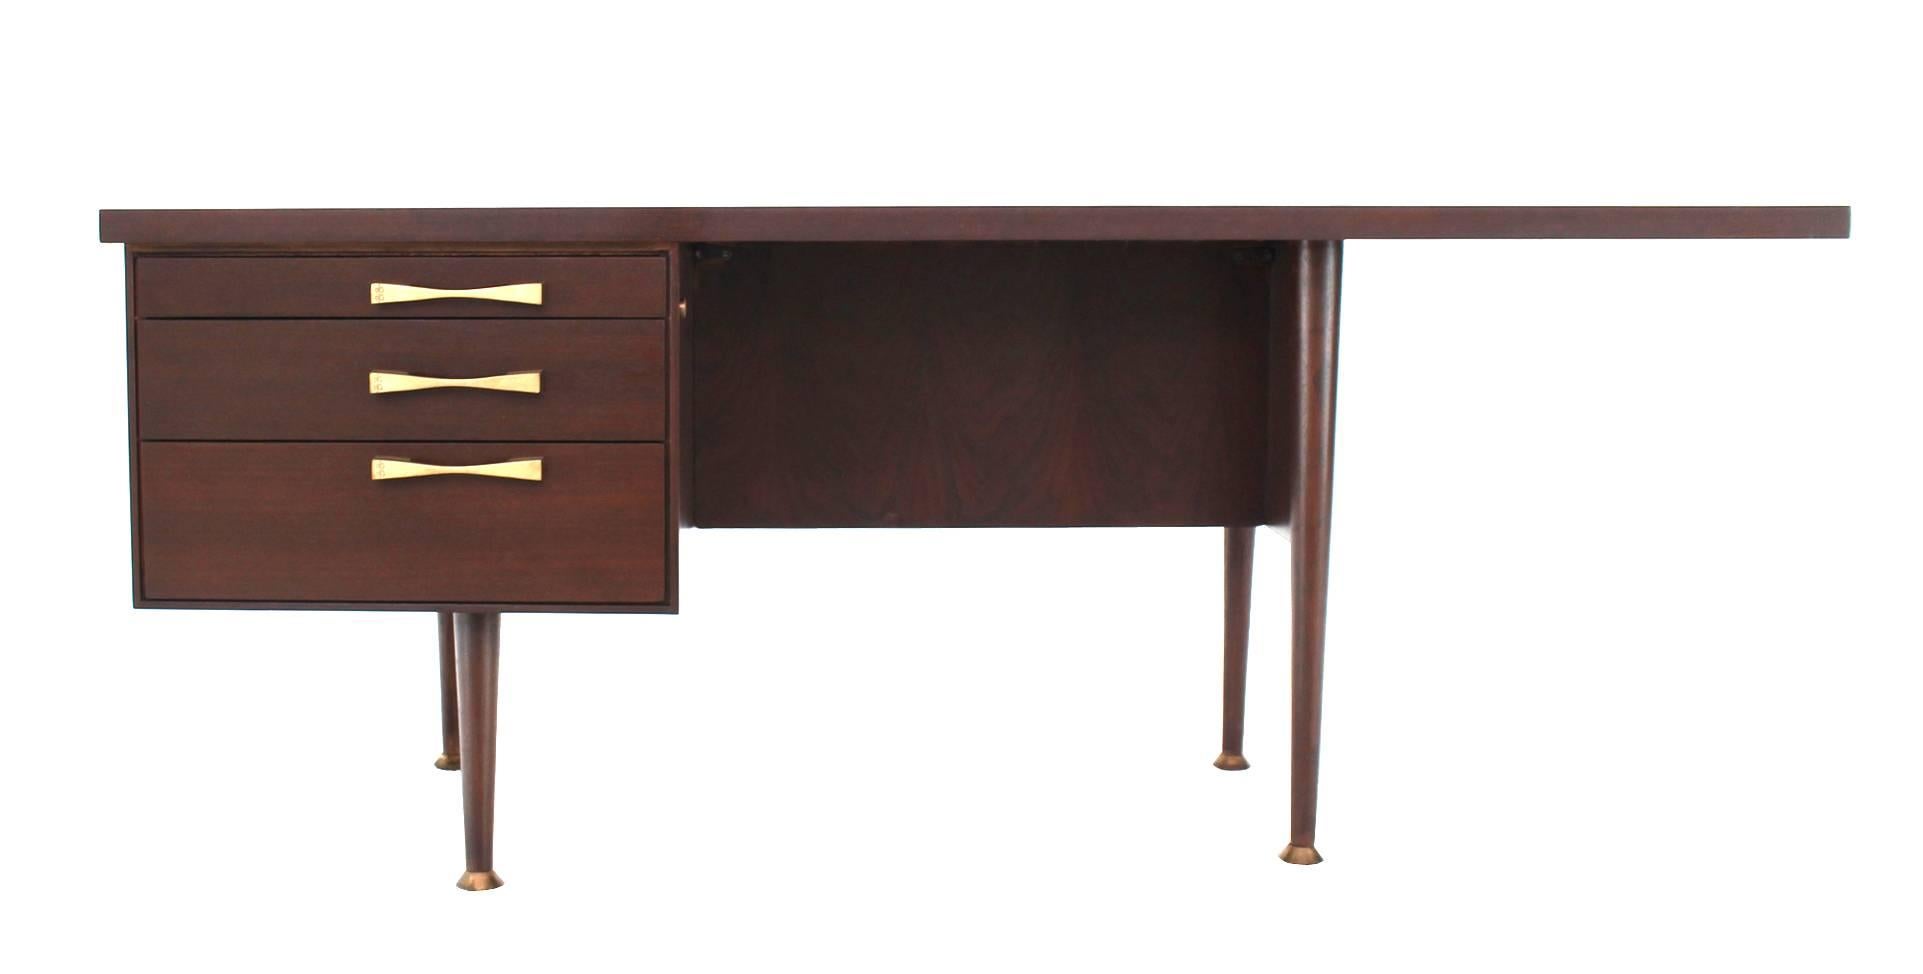 Nice architectural Mid-Century Modern design desk or writing table.